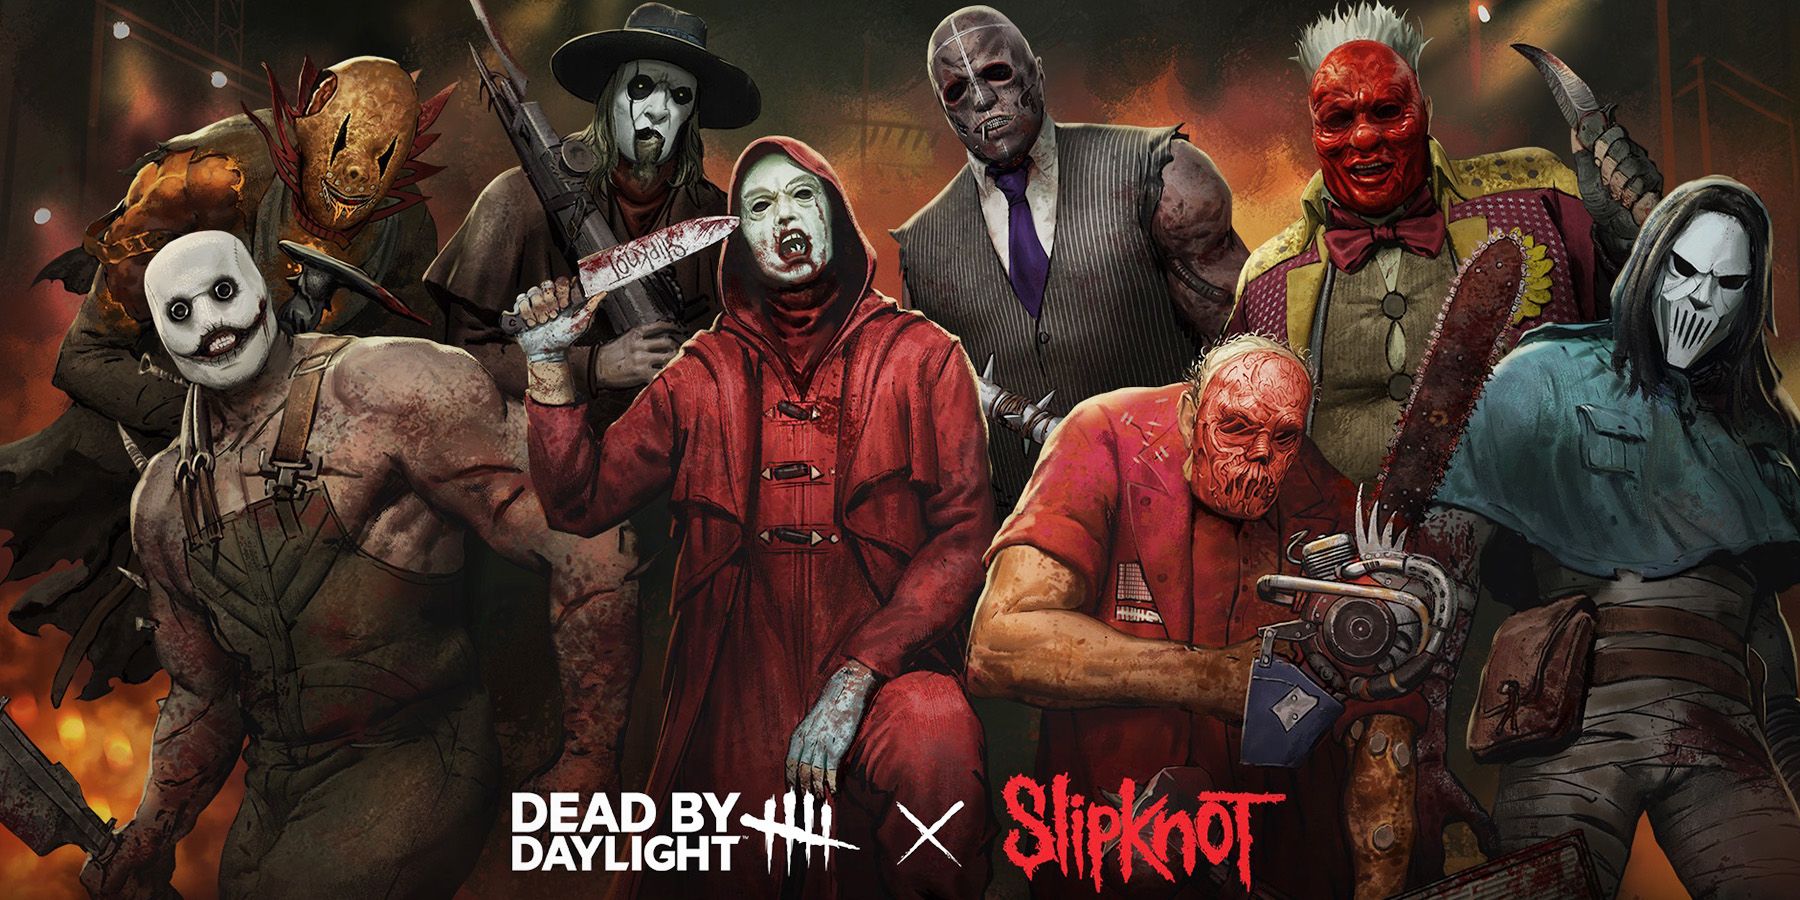 Dead by Daylight Slipknot Crossover Collection key art 2x1 crop